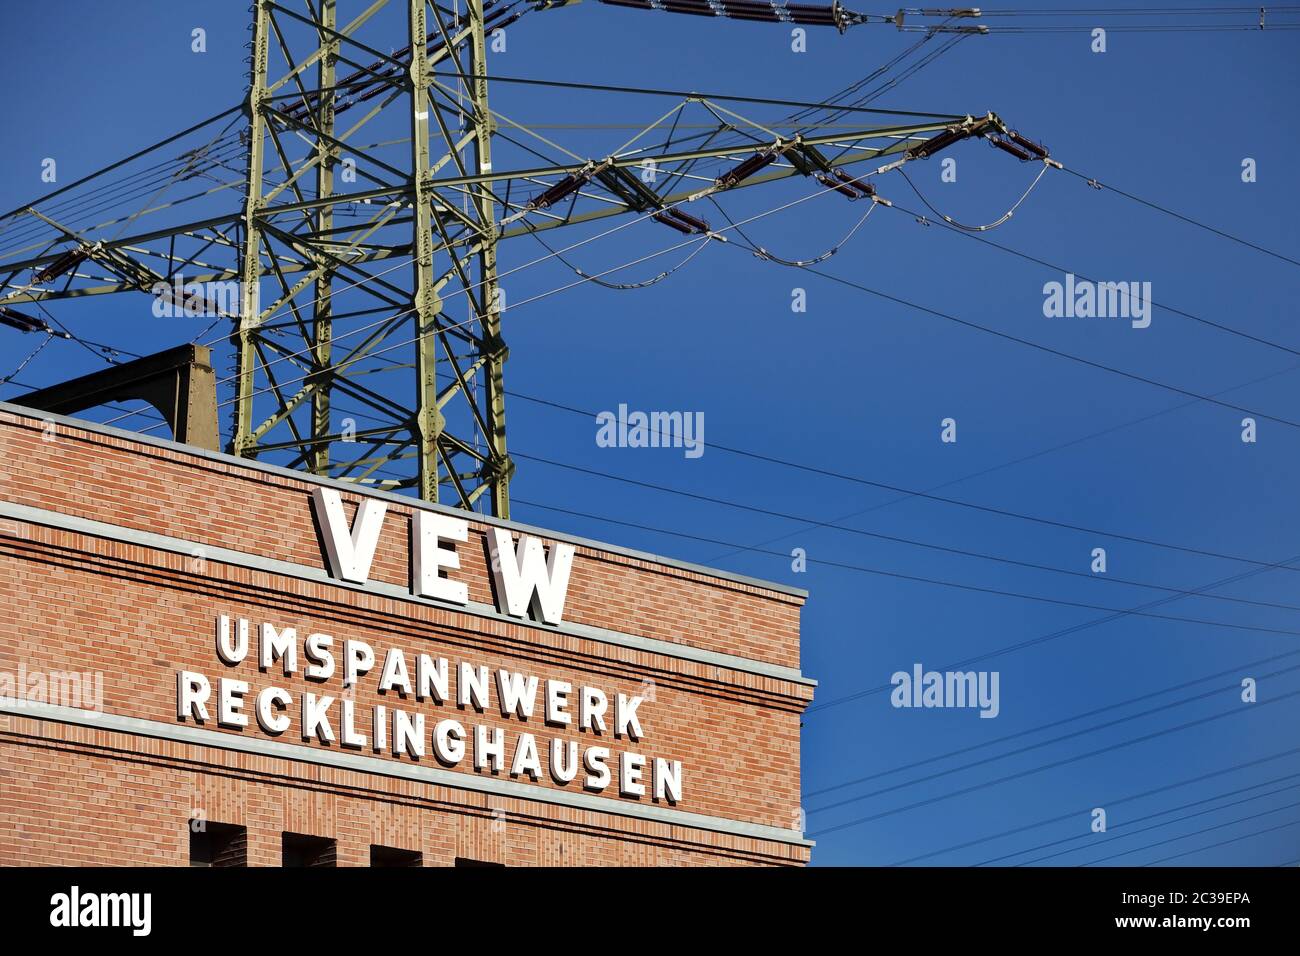 Substation Recklingkausen, route industrial culture, Recklinghausen, Ruhr area, Germany, Europe Stock Photo